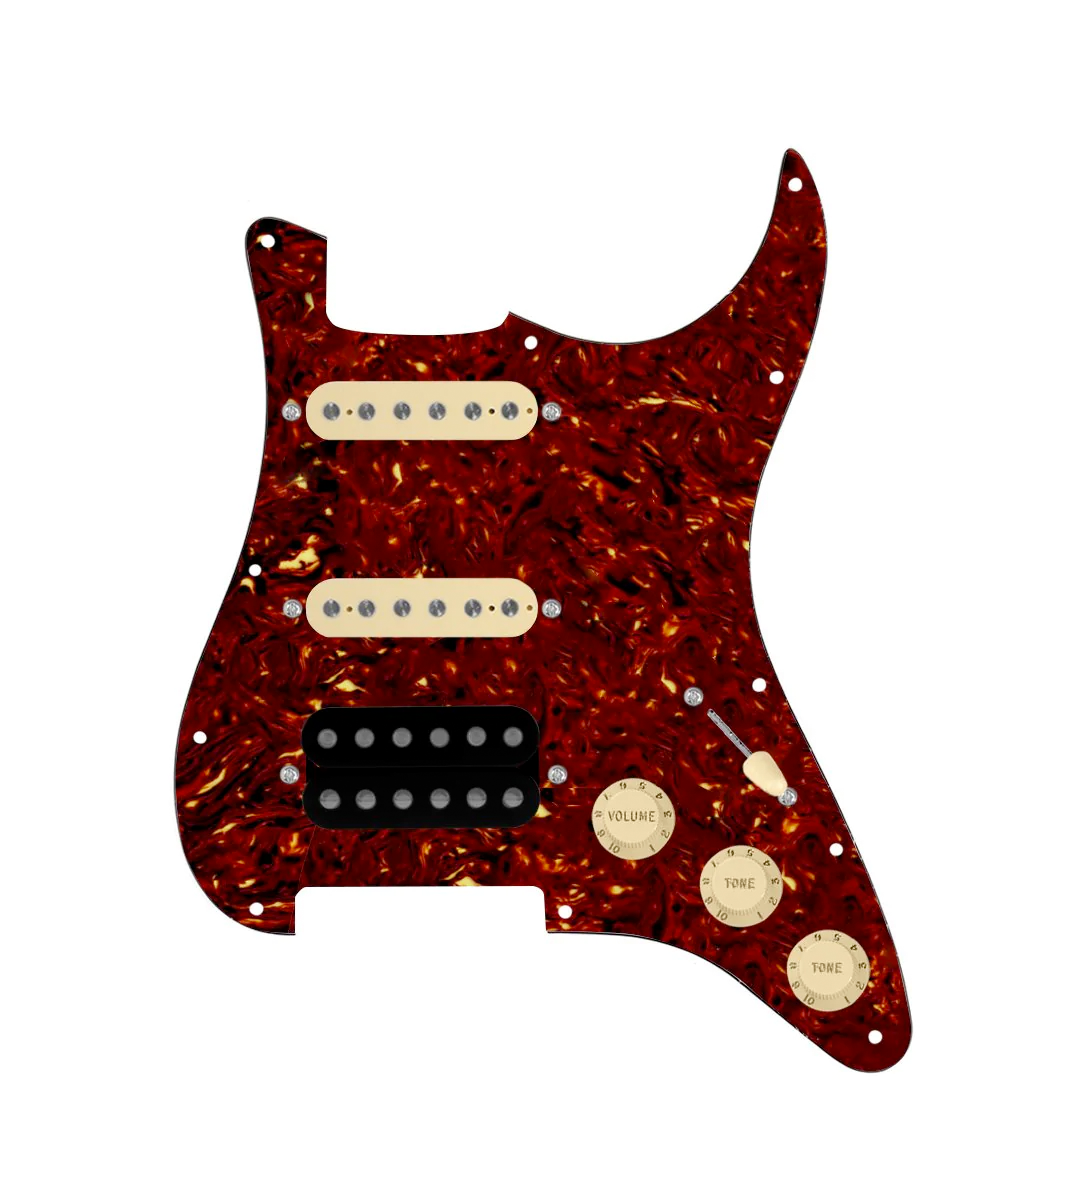 HSS Loaded Pickguard for Stratocasters® - HSS-SMTH-UC-TVTG-AW-TPG-AWKNB